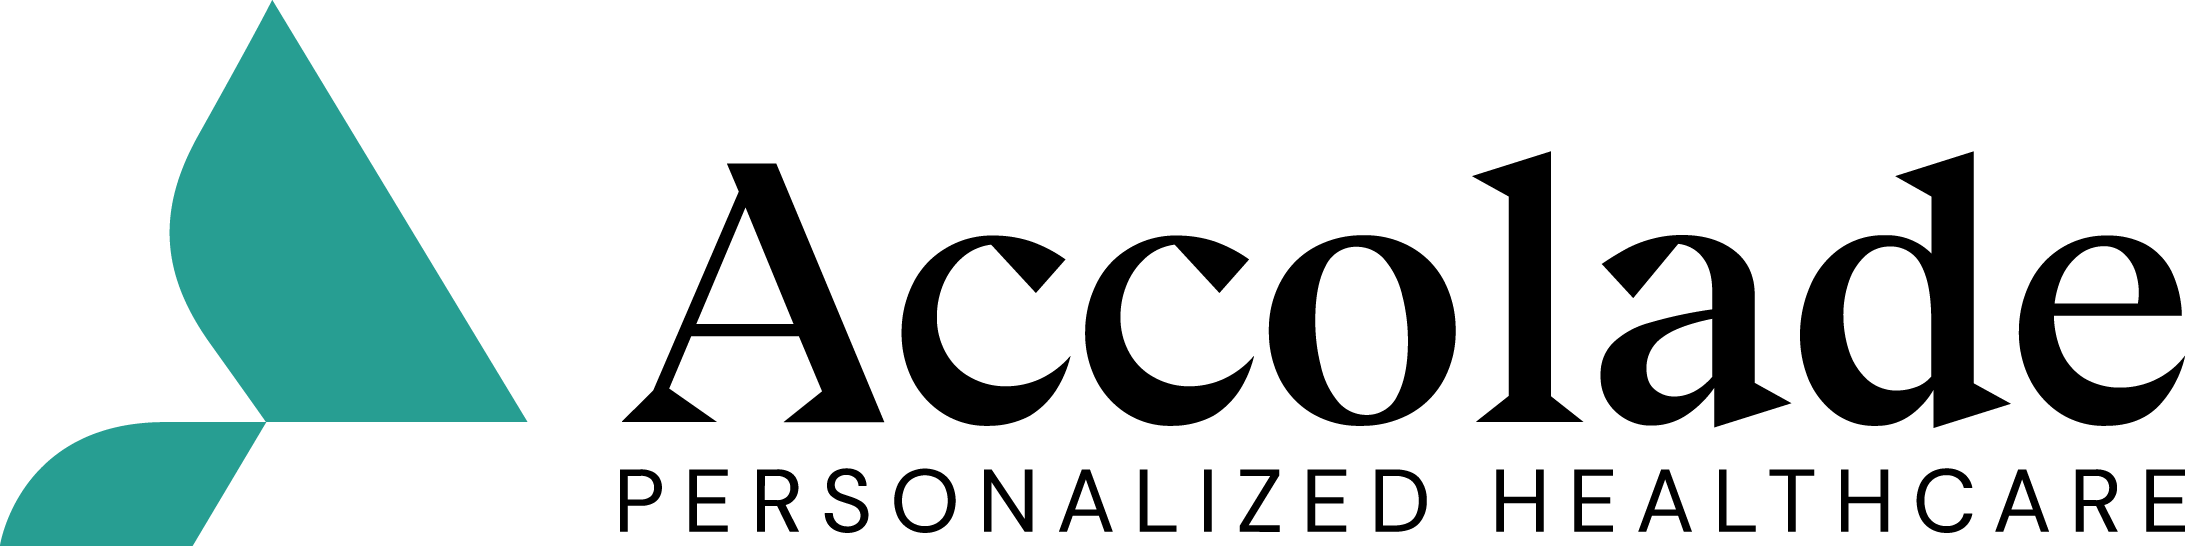 Accolade Analyst Finds Stock Attractively Valued Post Q3 Beat, T-5 Contract Win